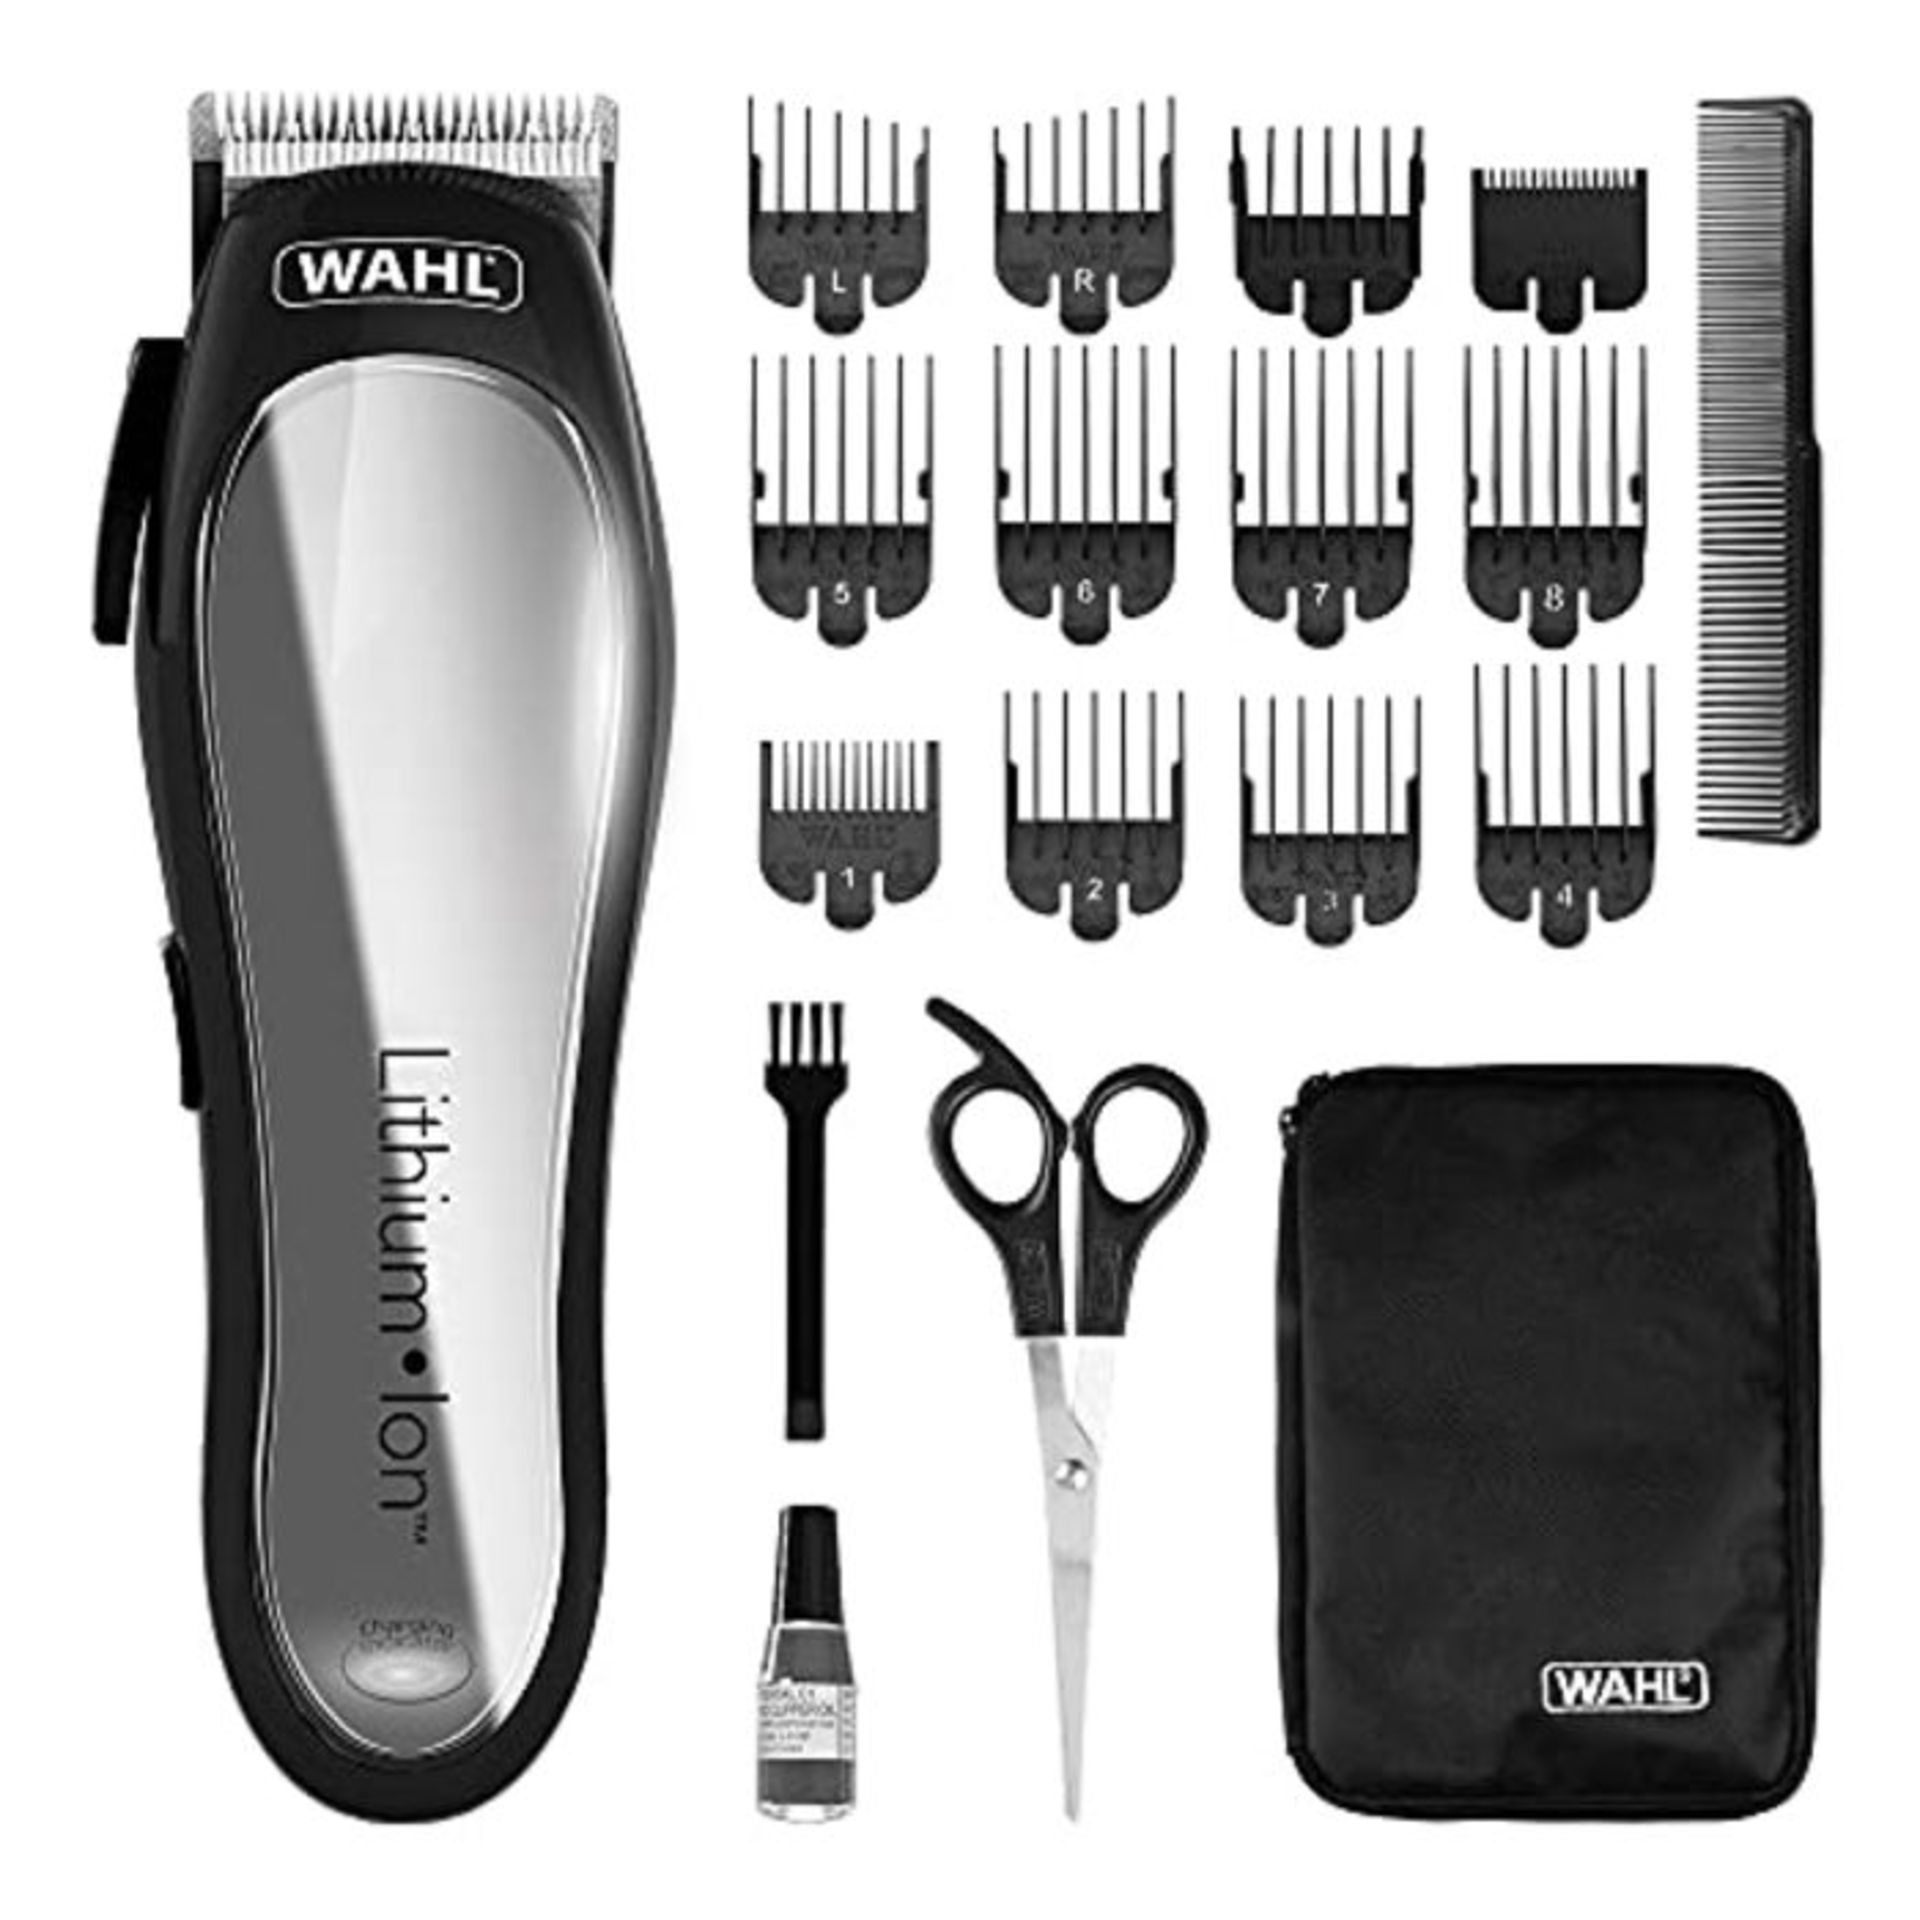 WAHL Hair Clippers for Men, Power Clipper, Head Shaver, Men's Hair Clippers, Professio